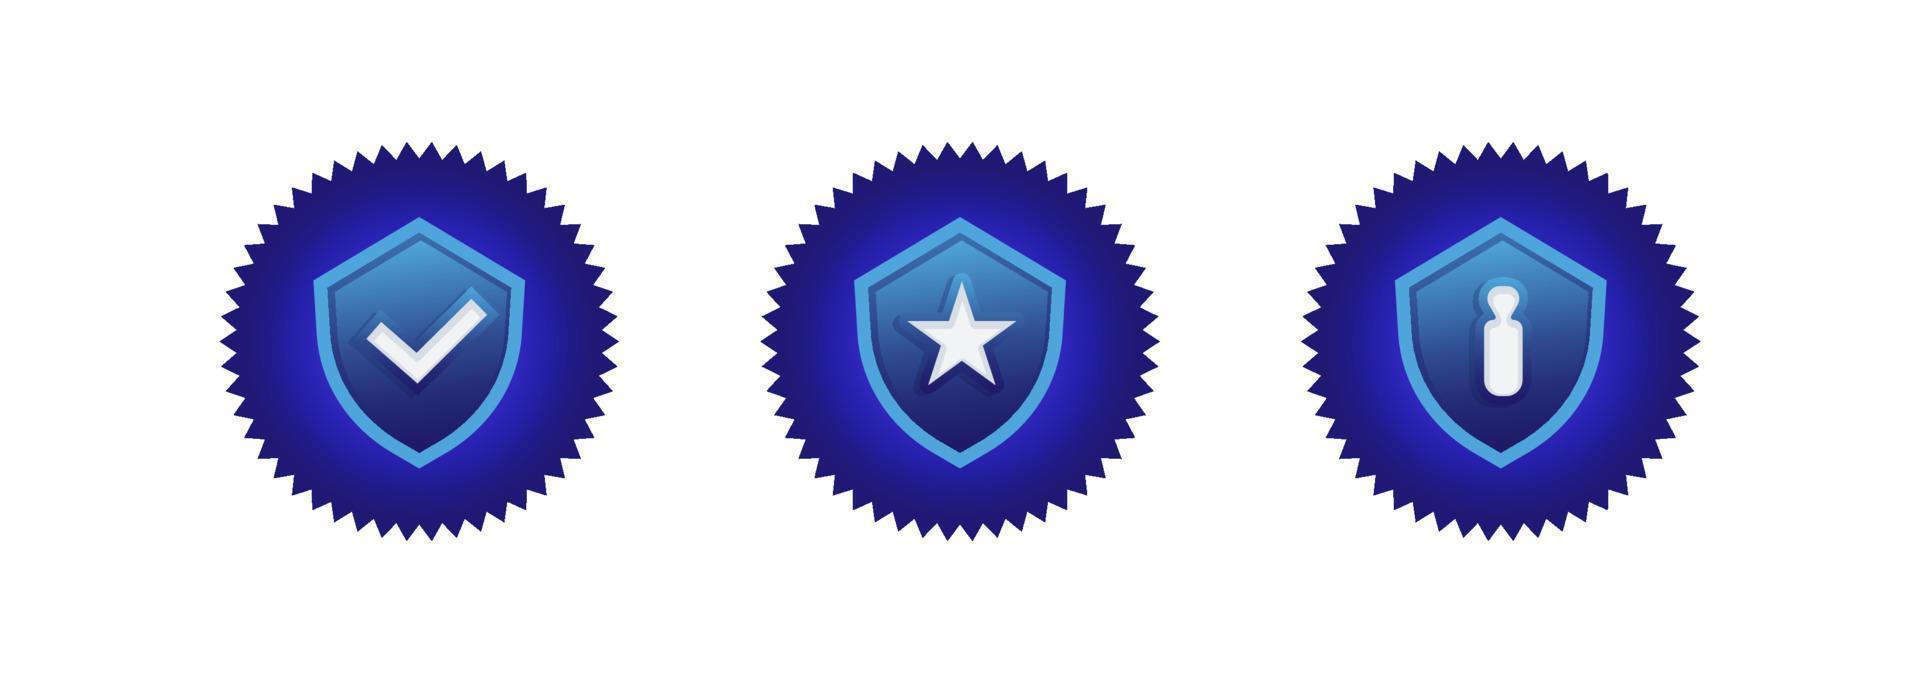 Blue recommended secured verified logo shield with checklist lock and star isolated badge illustration vector